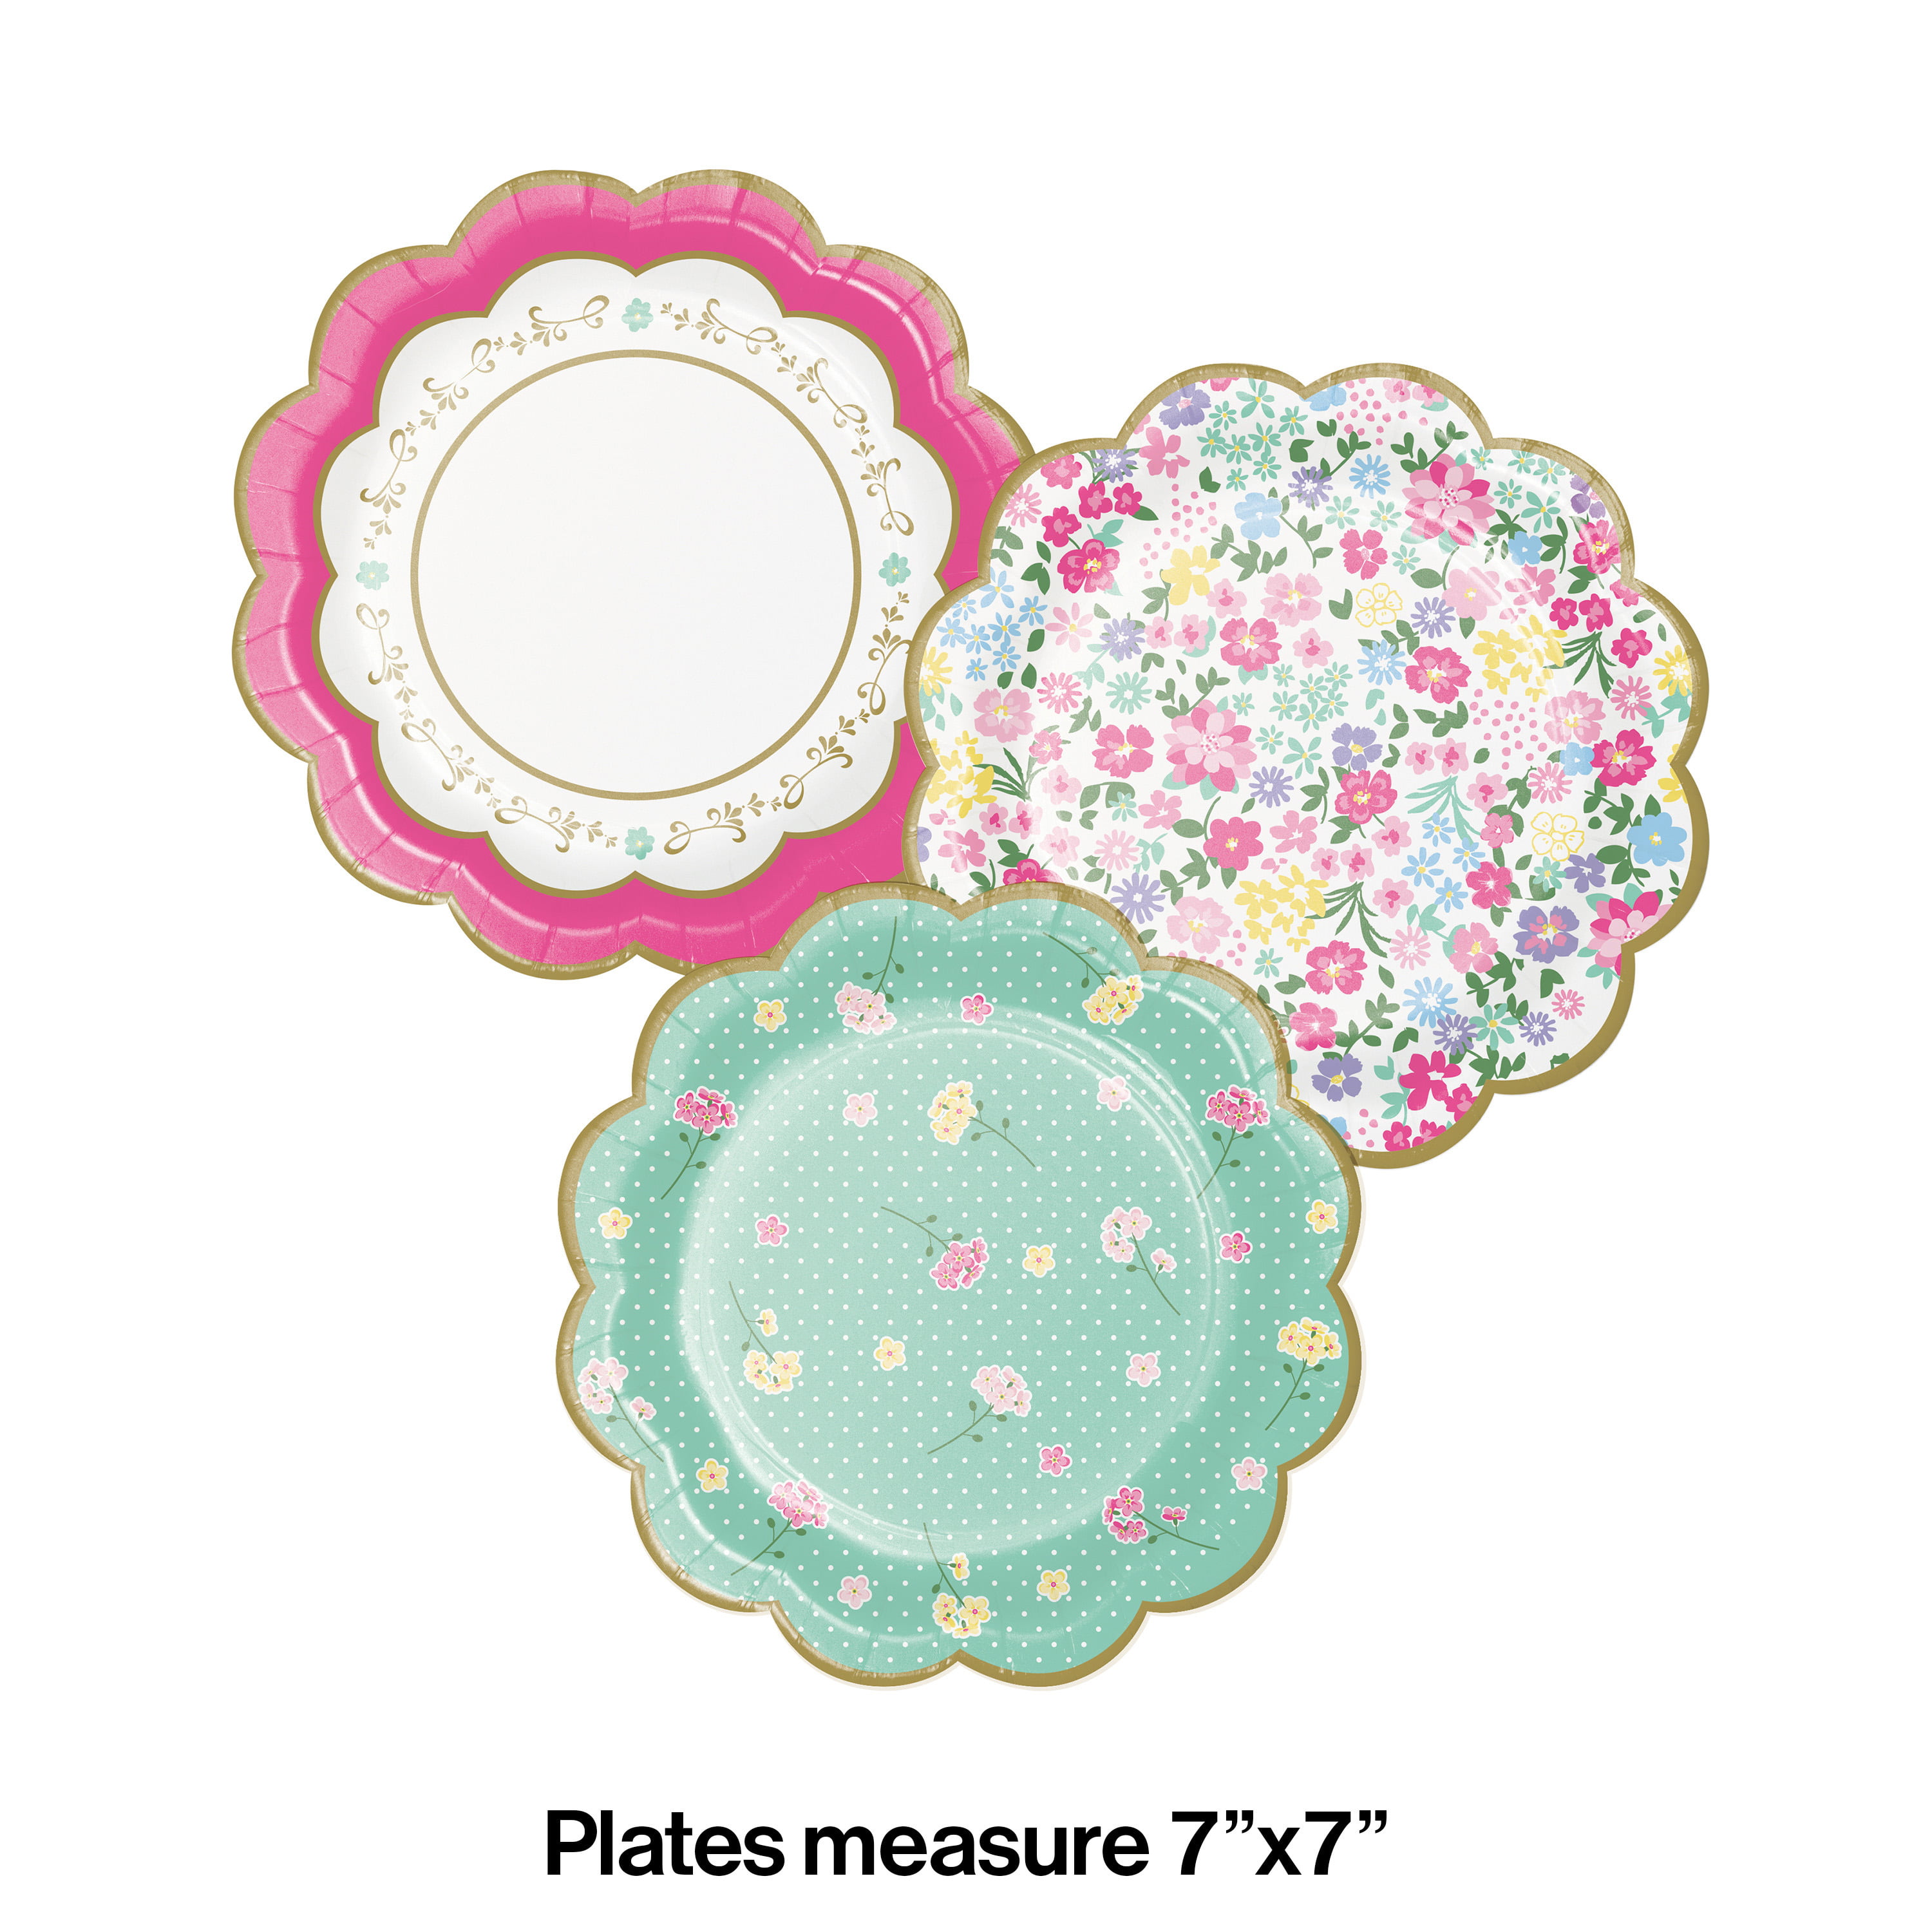 Black and White Check Creative Converting 24 Count Round Dessert Plates